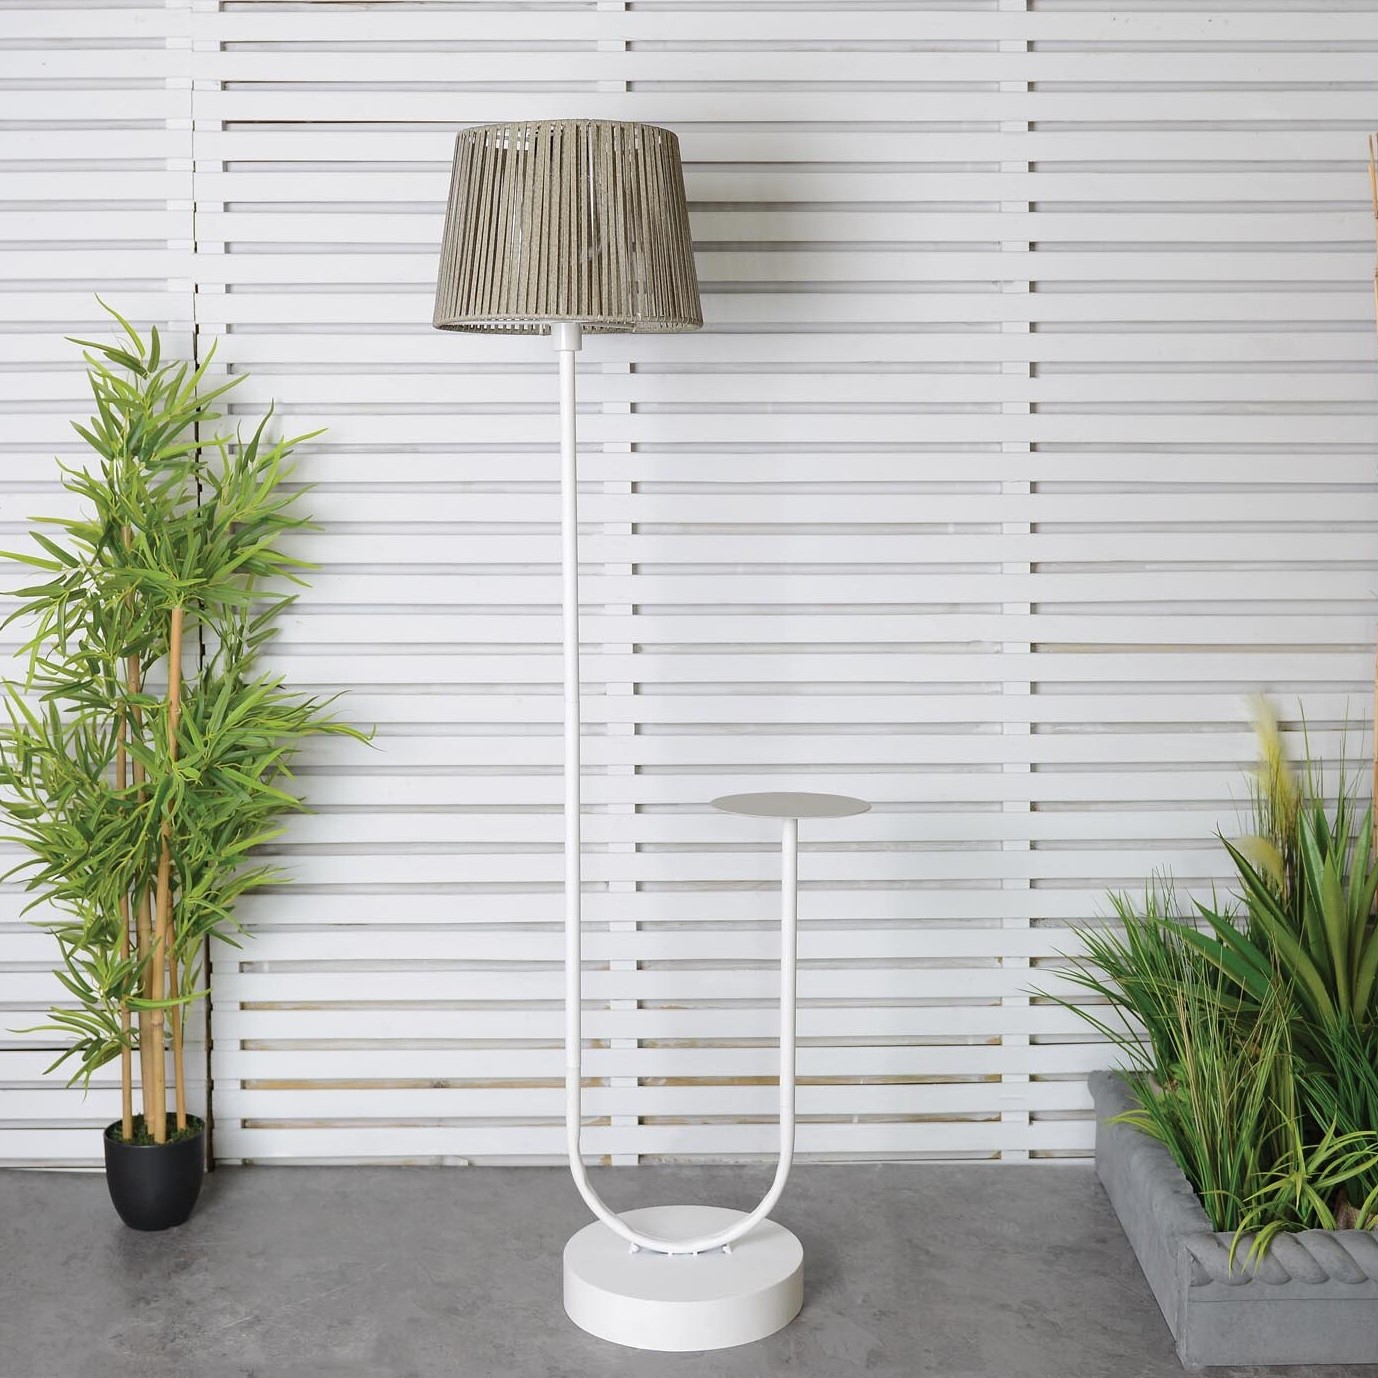 Ada Solar Floor Lamp with Table - White Image 1